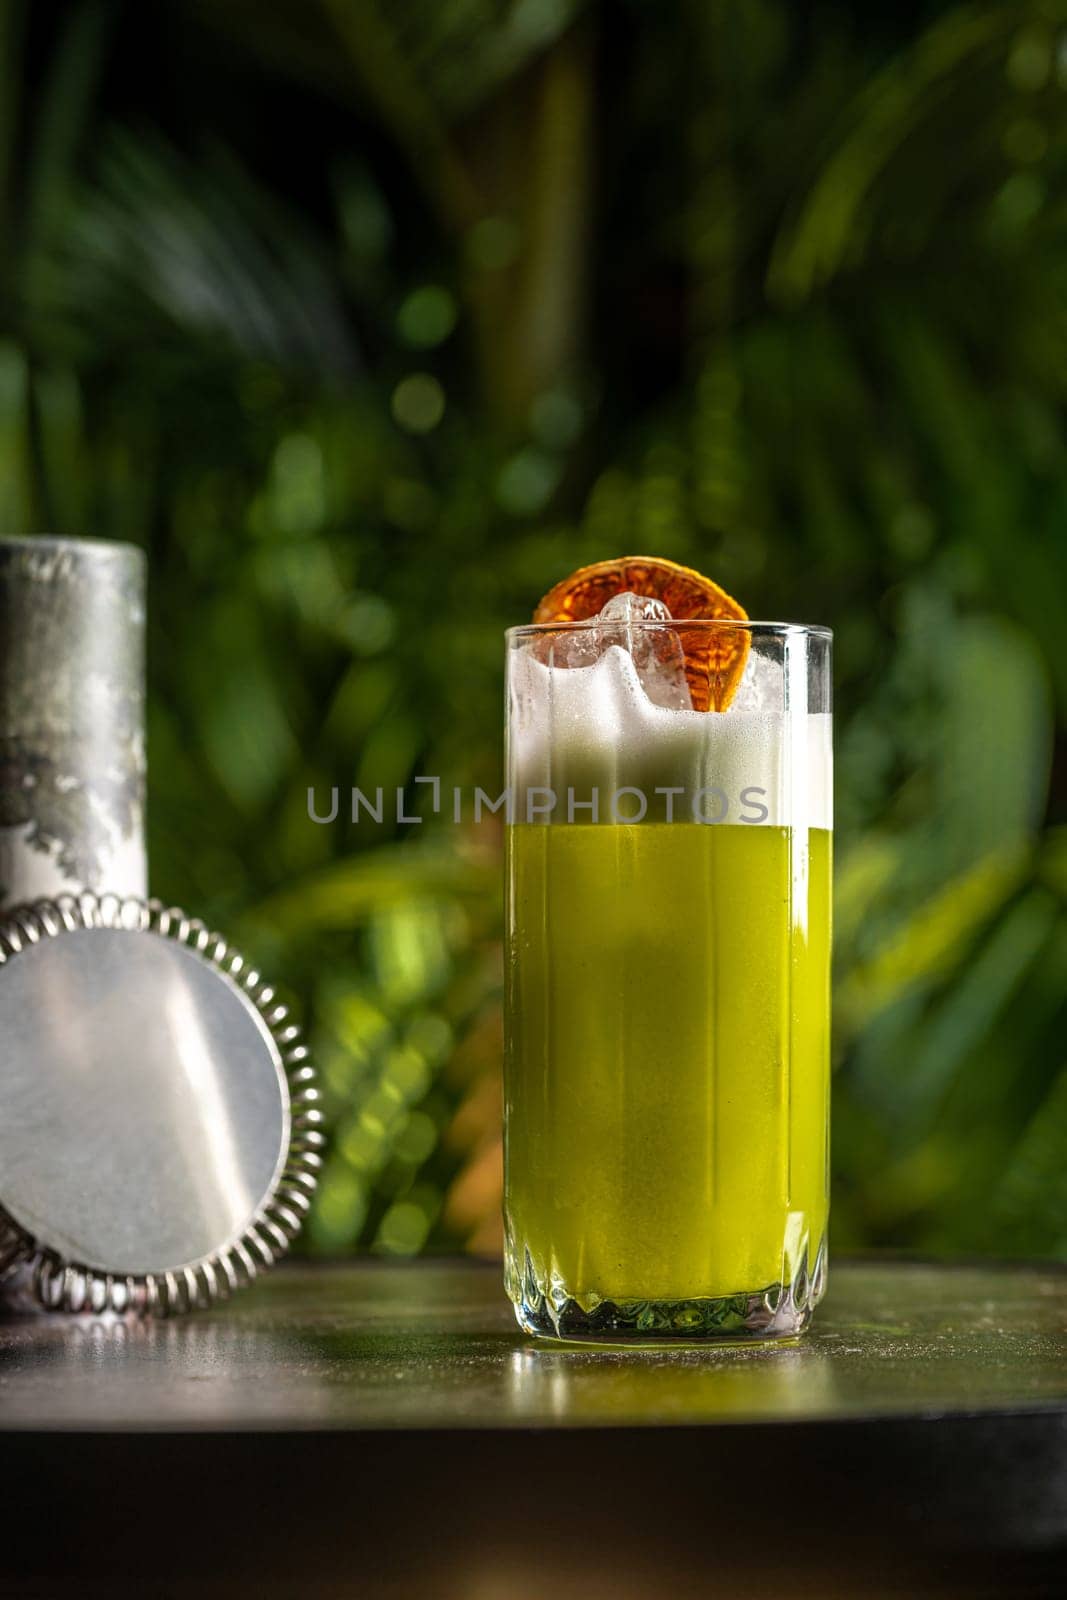 Luxury cocktail on the wooden table on a dark background by Sonat